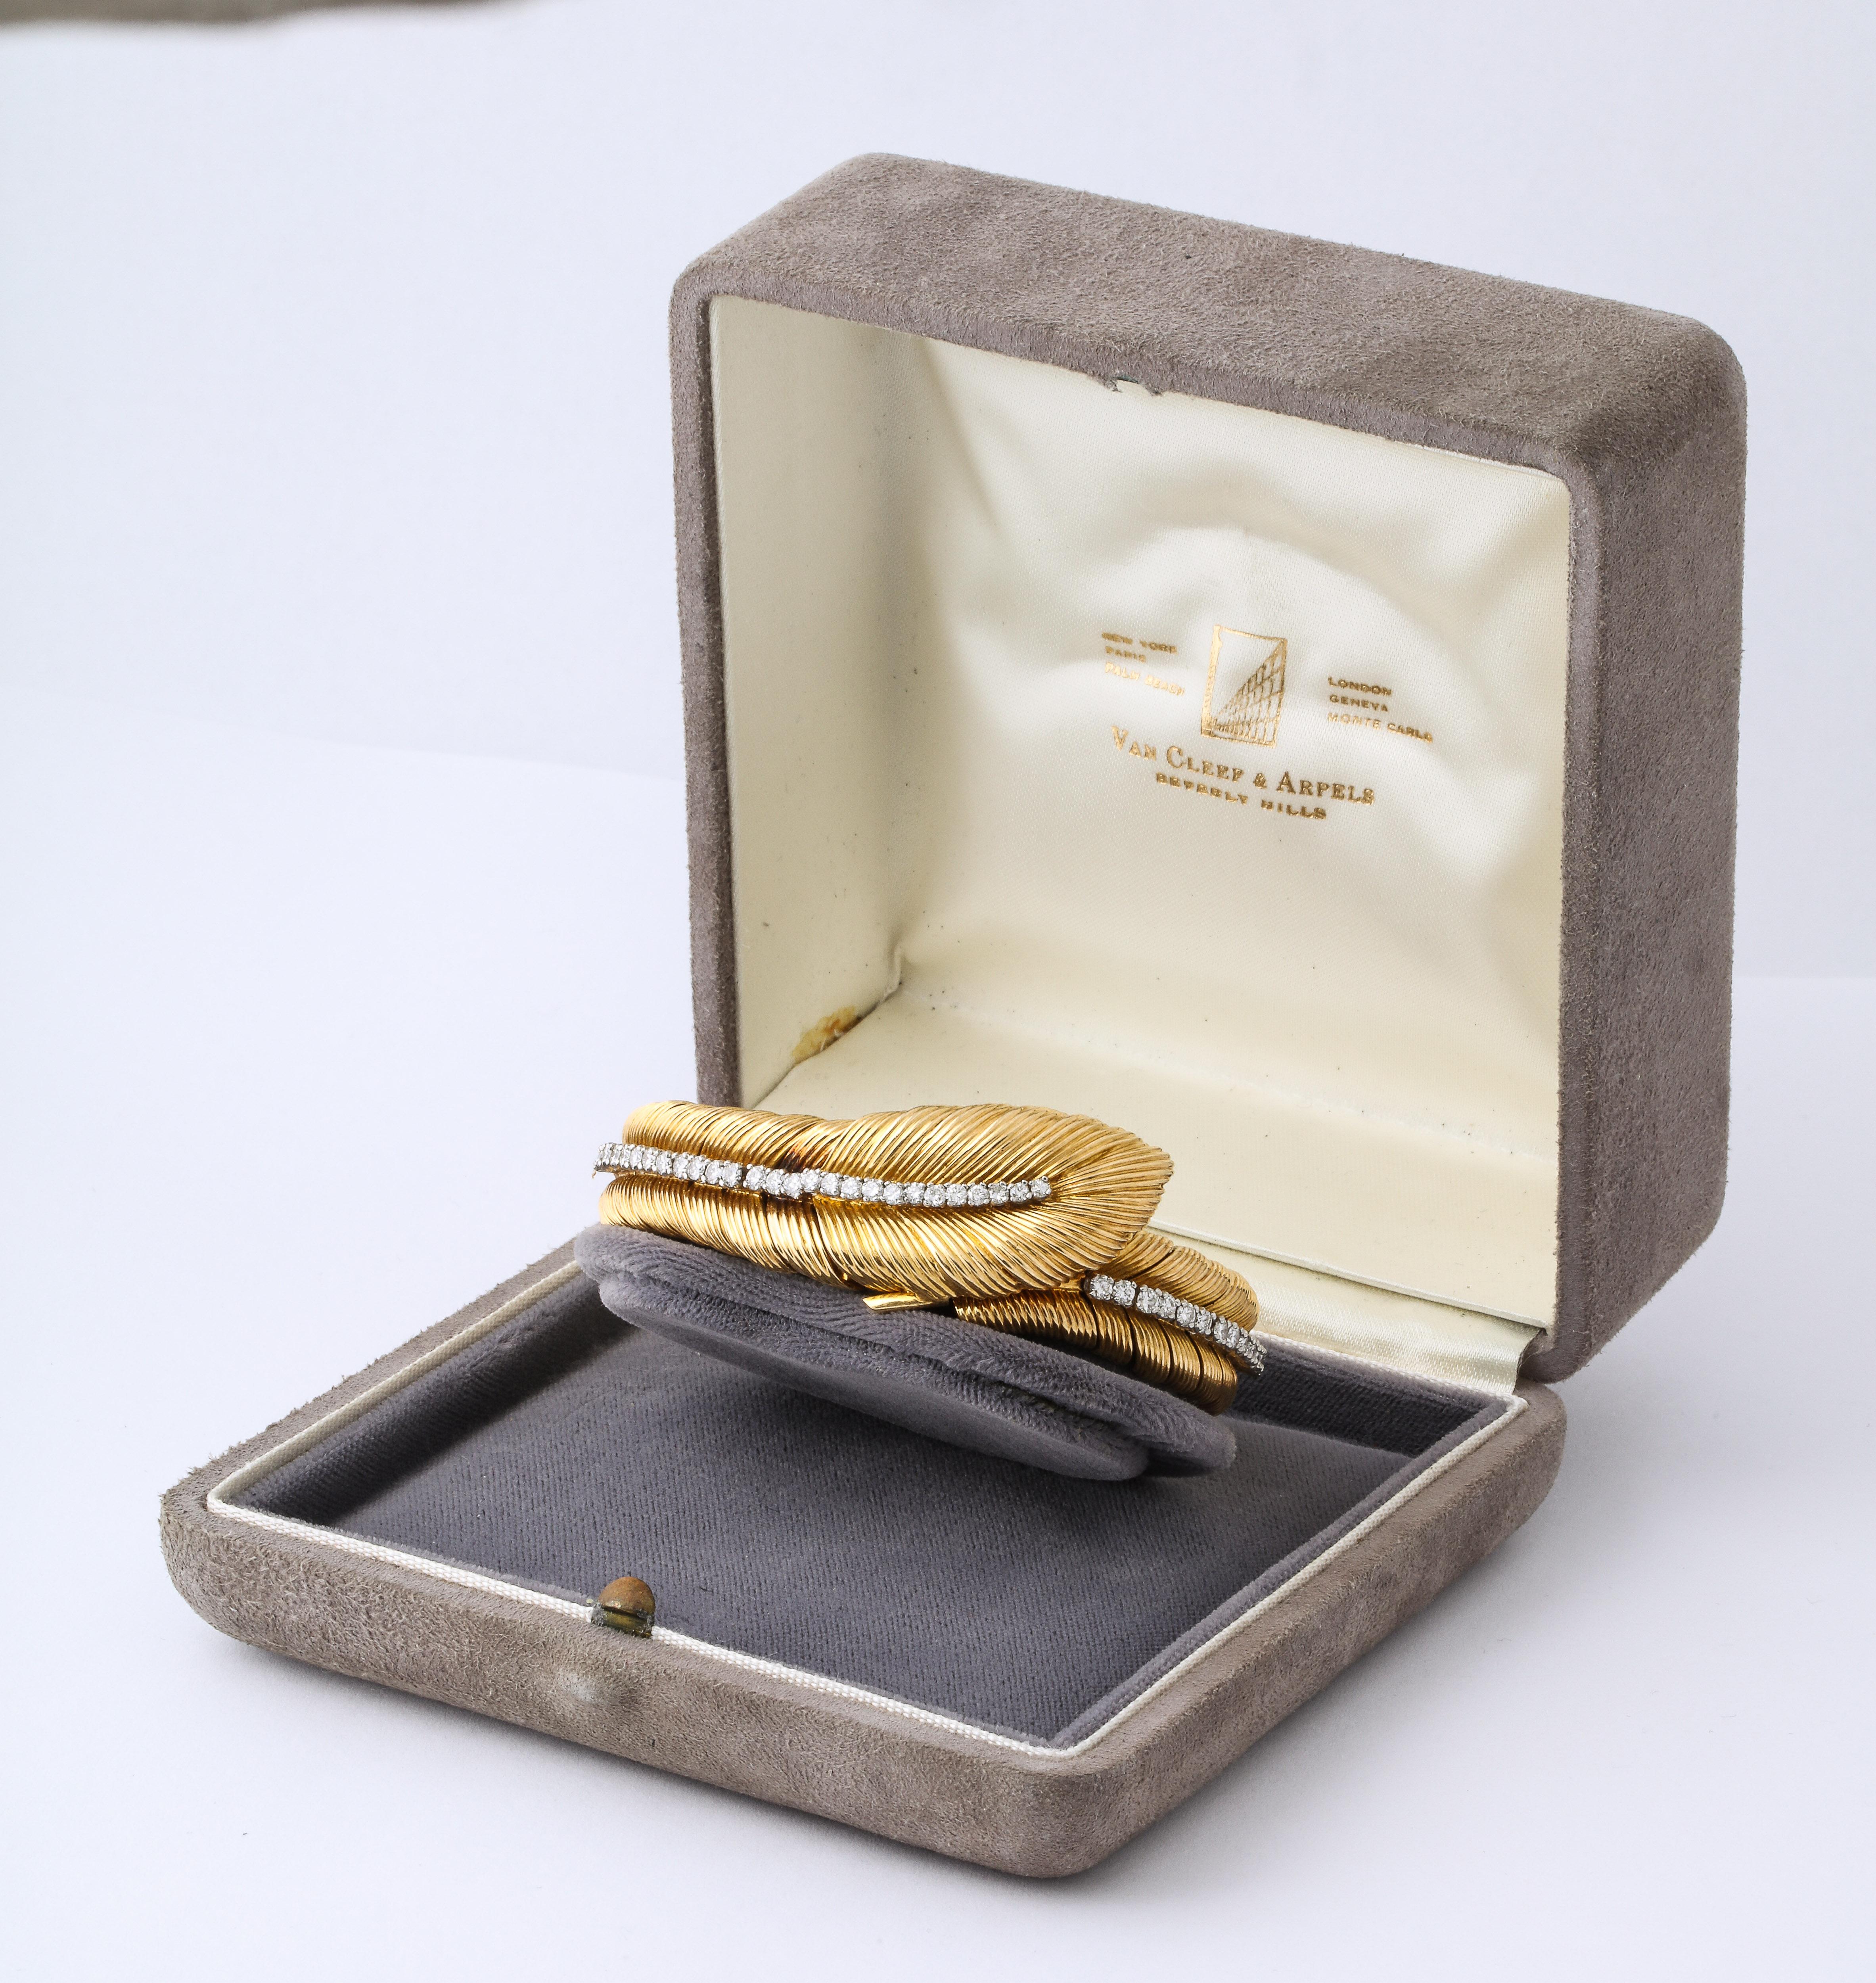 Vintage 1950's Van Cleef & Arpels Diamond Bracelet Watch with Box, set with round brilliant cut diamonds, designed as a foliate bracelet with a watch compartment, signed Movado
70 Grams 
6 ¼ inch total length
Movement Movado
Signed Van Cleef &